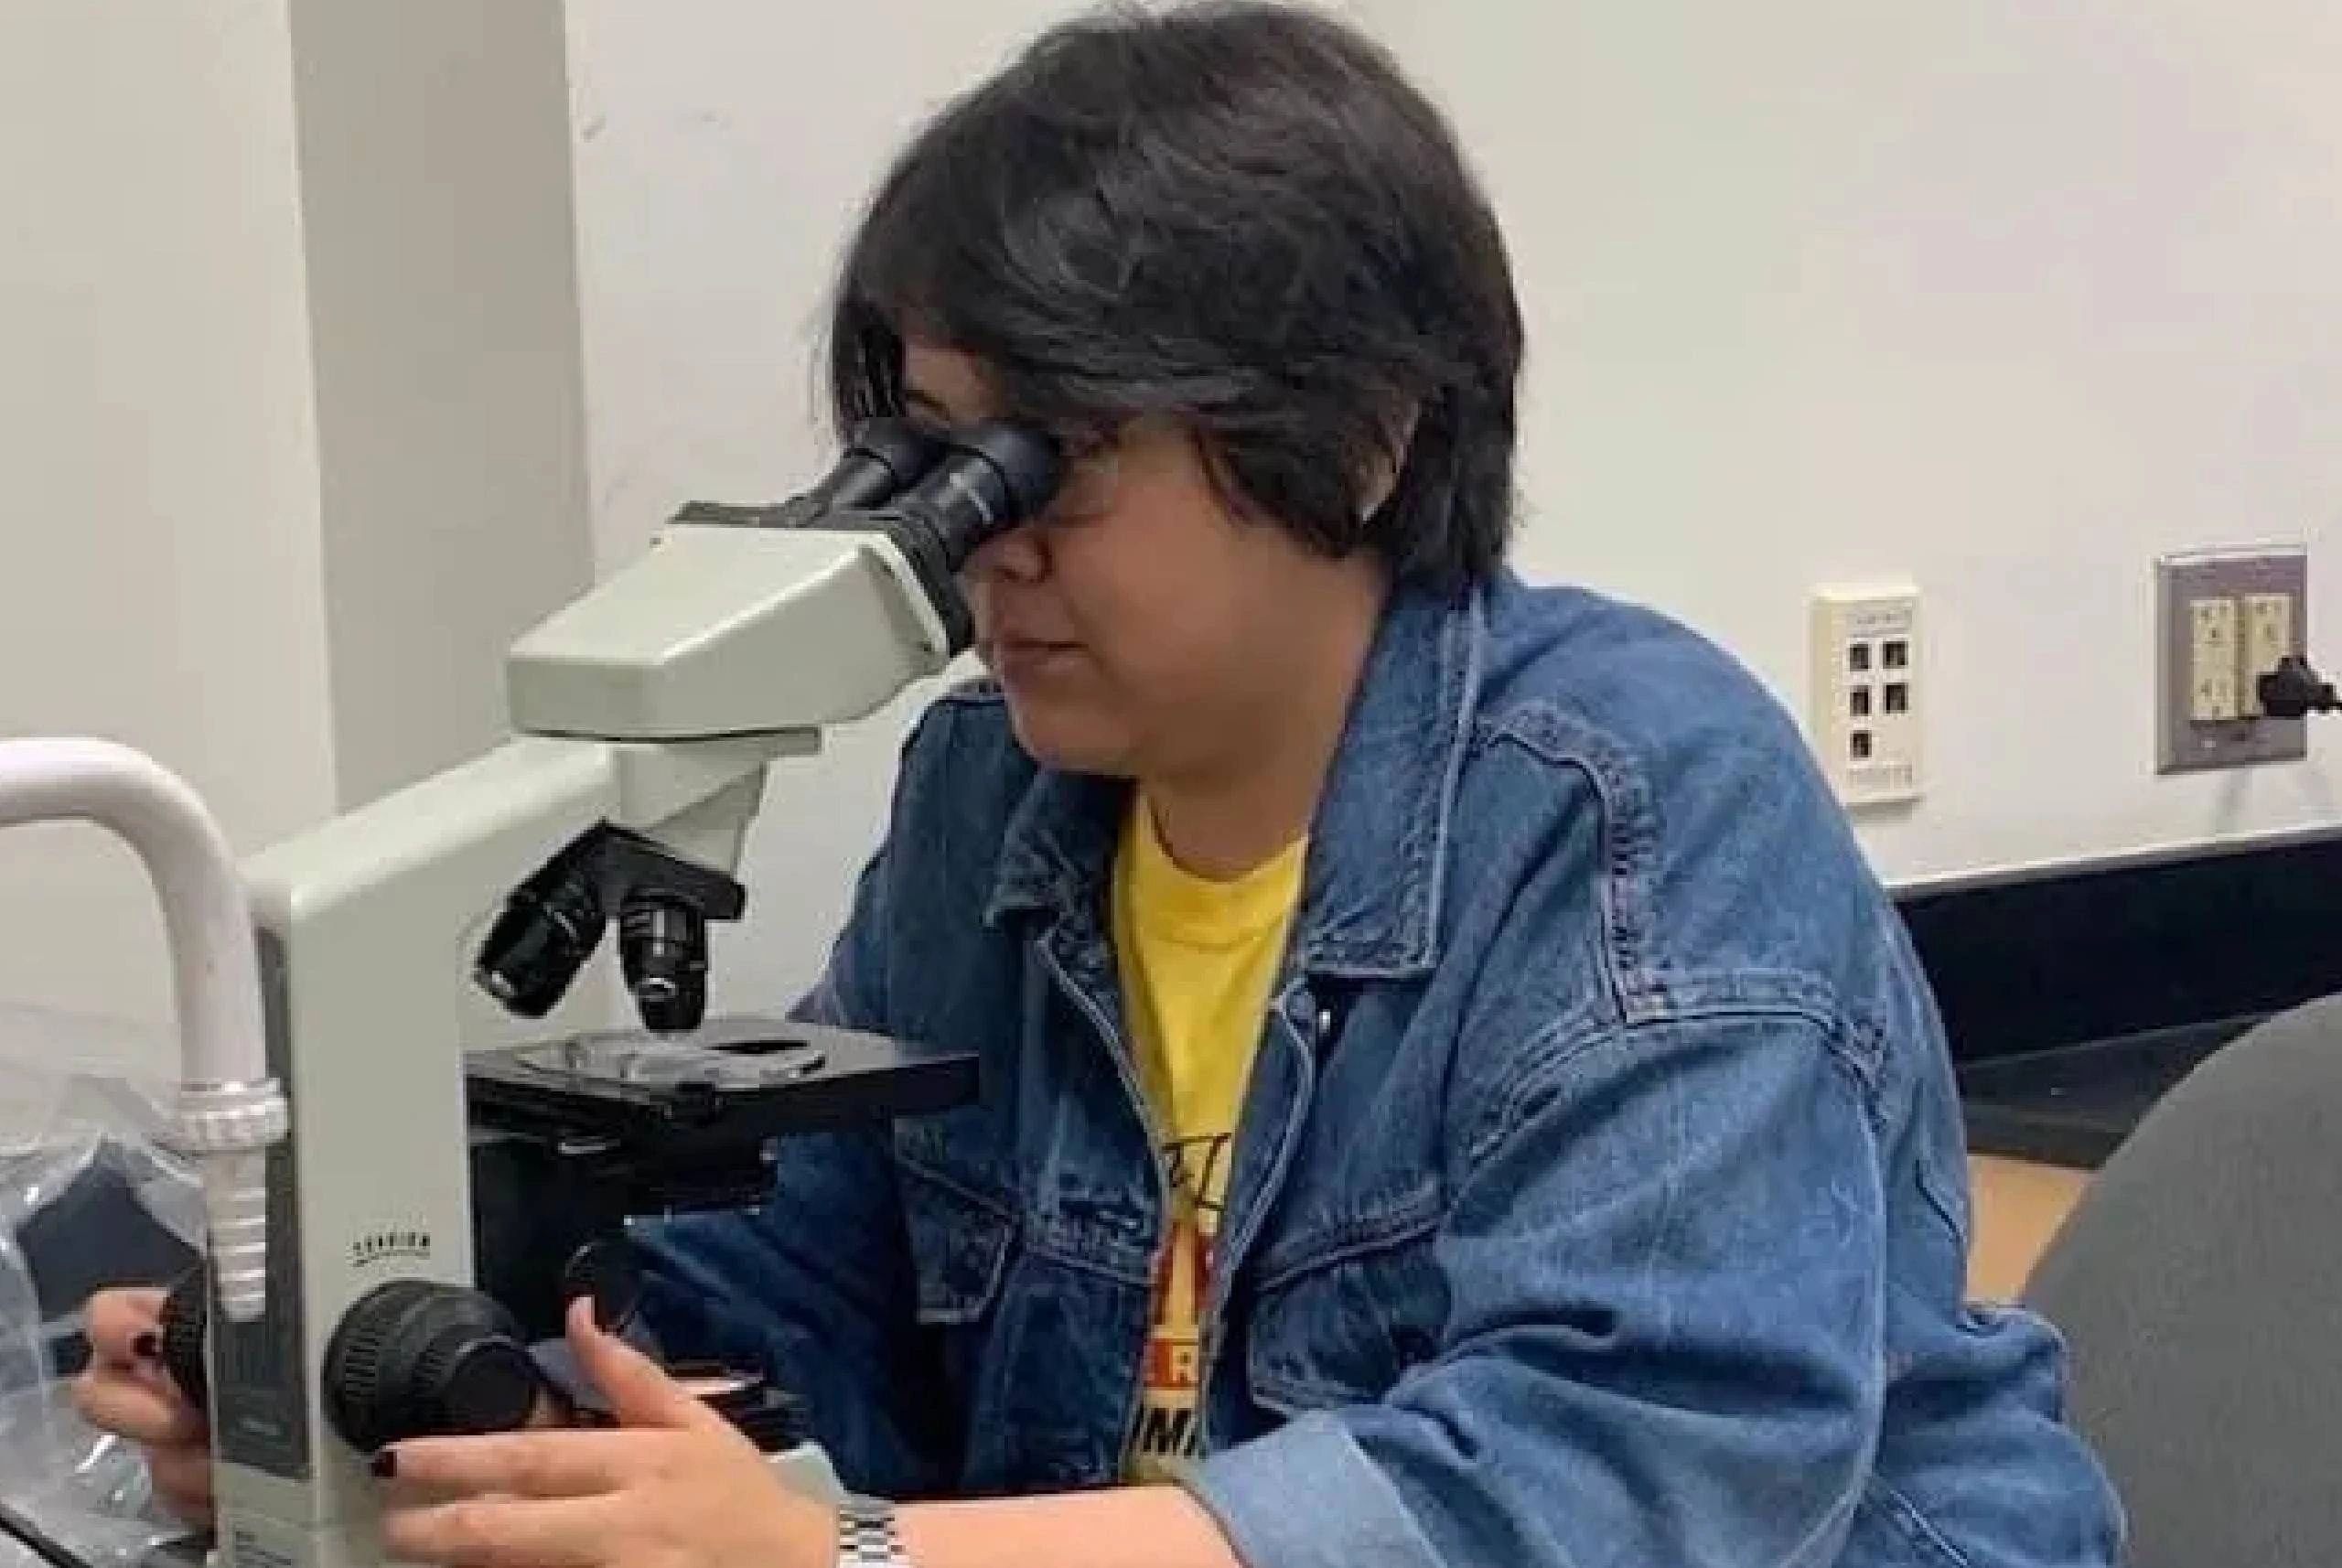 A Woman Looking Through the Microscope